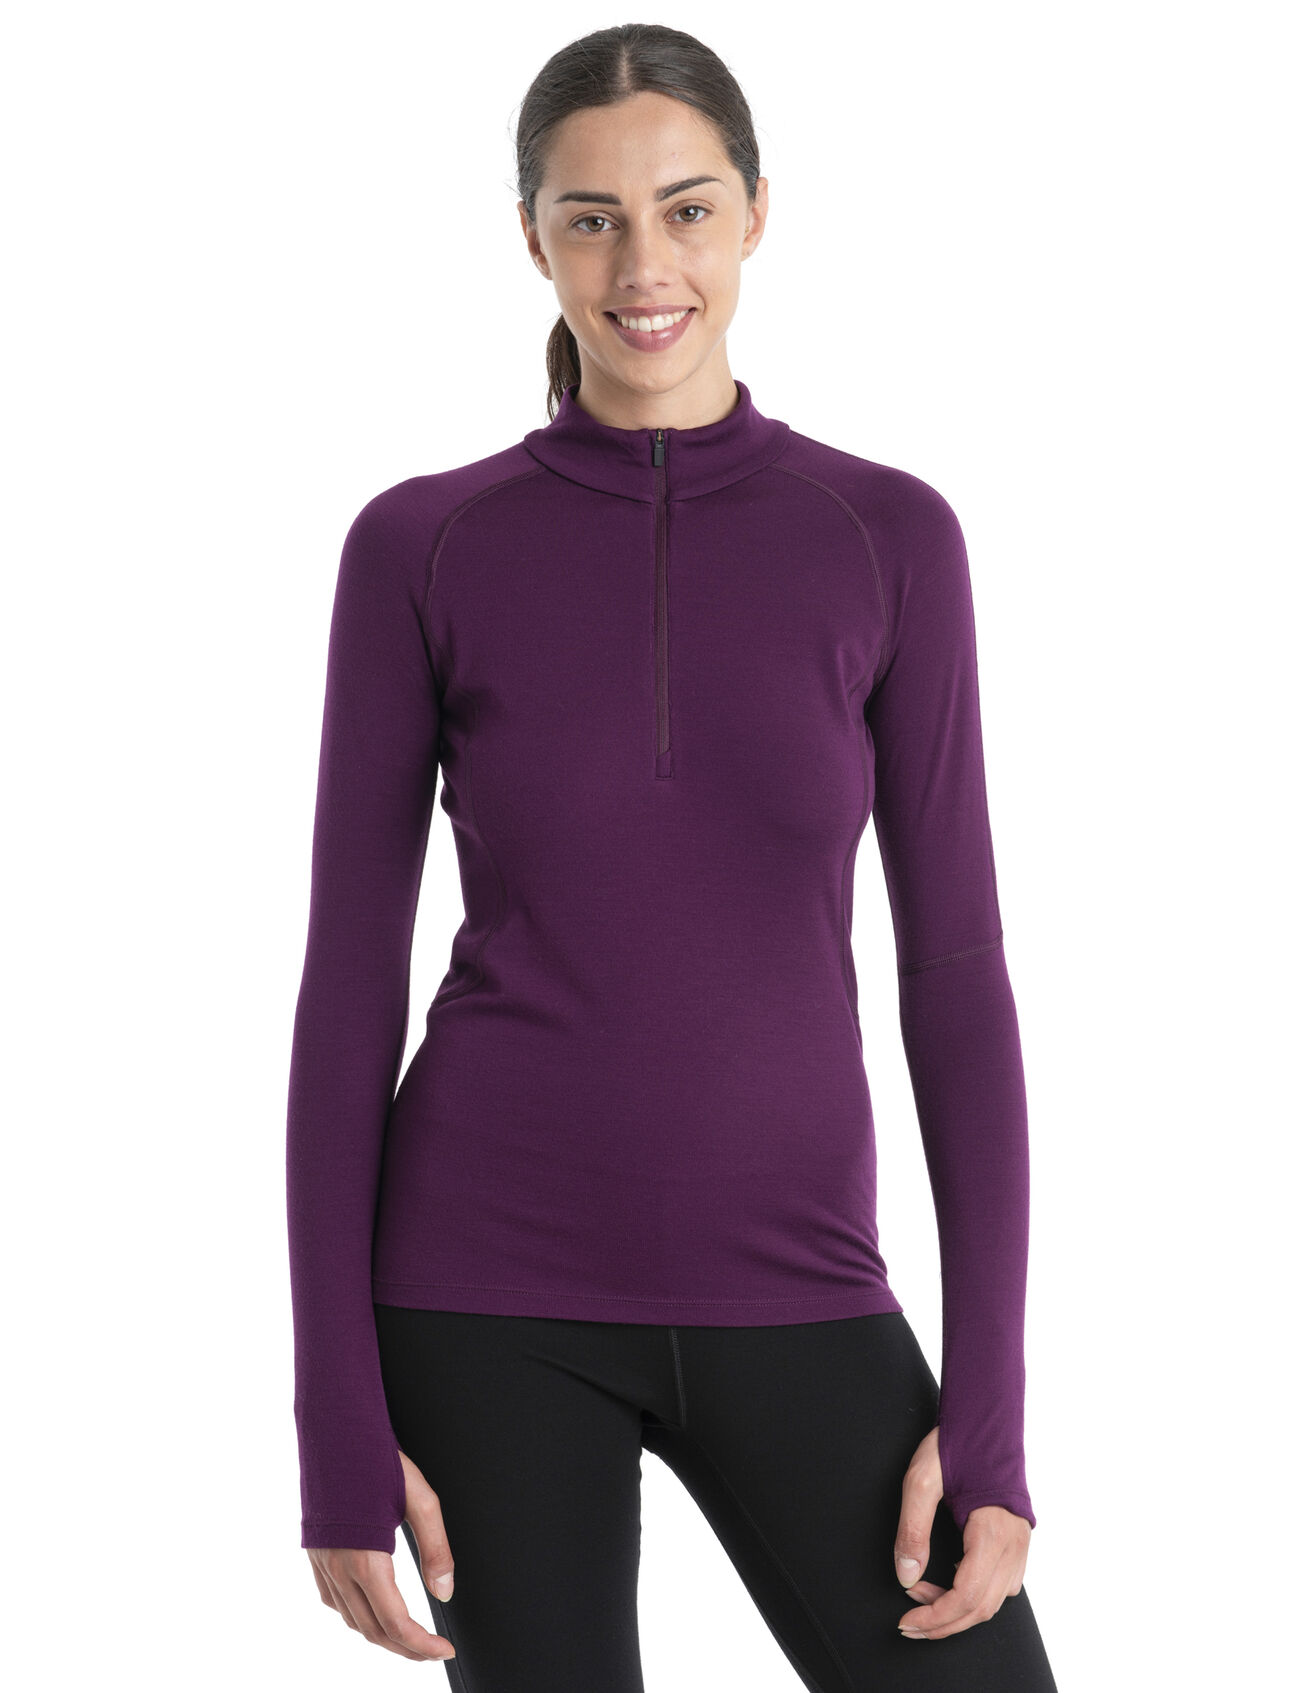 Womens 300 MerinoFine™ Polar Long Sleeve Half Zip Thermal Top A heavyweight base layer top made with exceptionally soft, 100% merino wool fibres, the 300 MerinoFine™ Polar Long Sleeve Half Zip keeps you warm on the coldest of days.